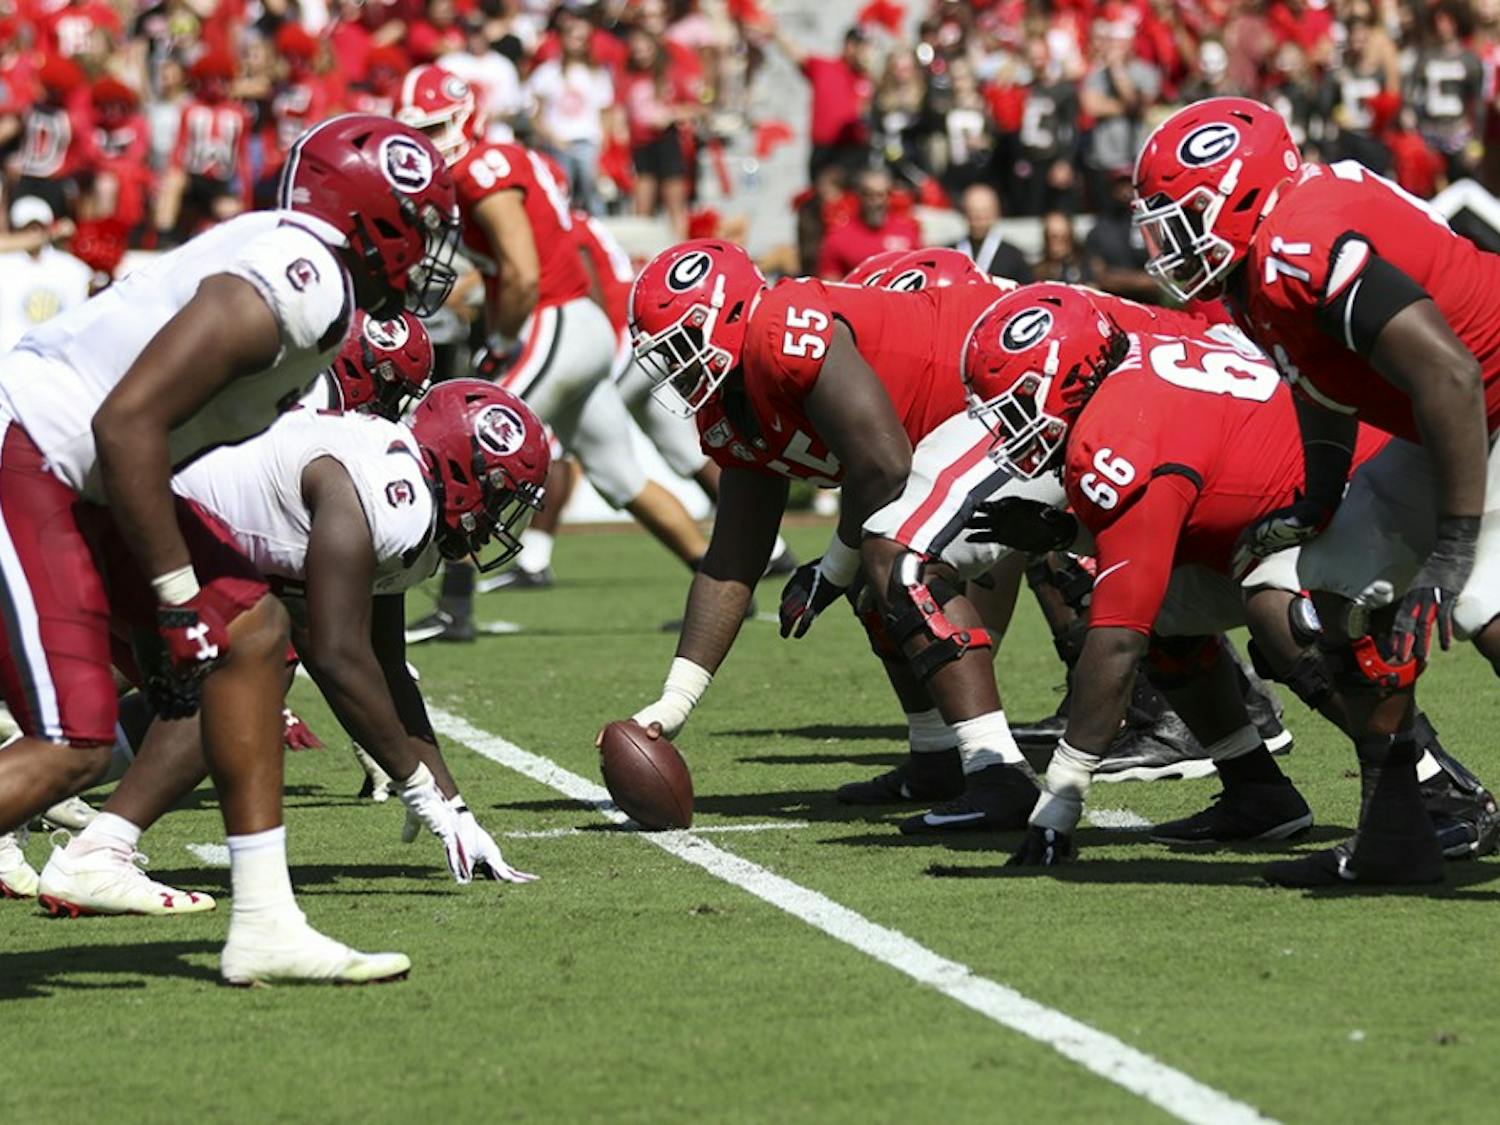 The Gamecocks’ defensive line faces off against UGA’s offense.